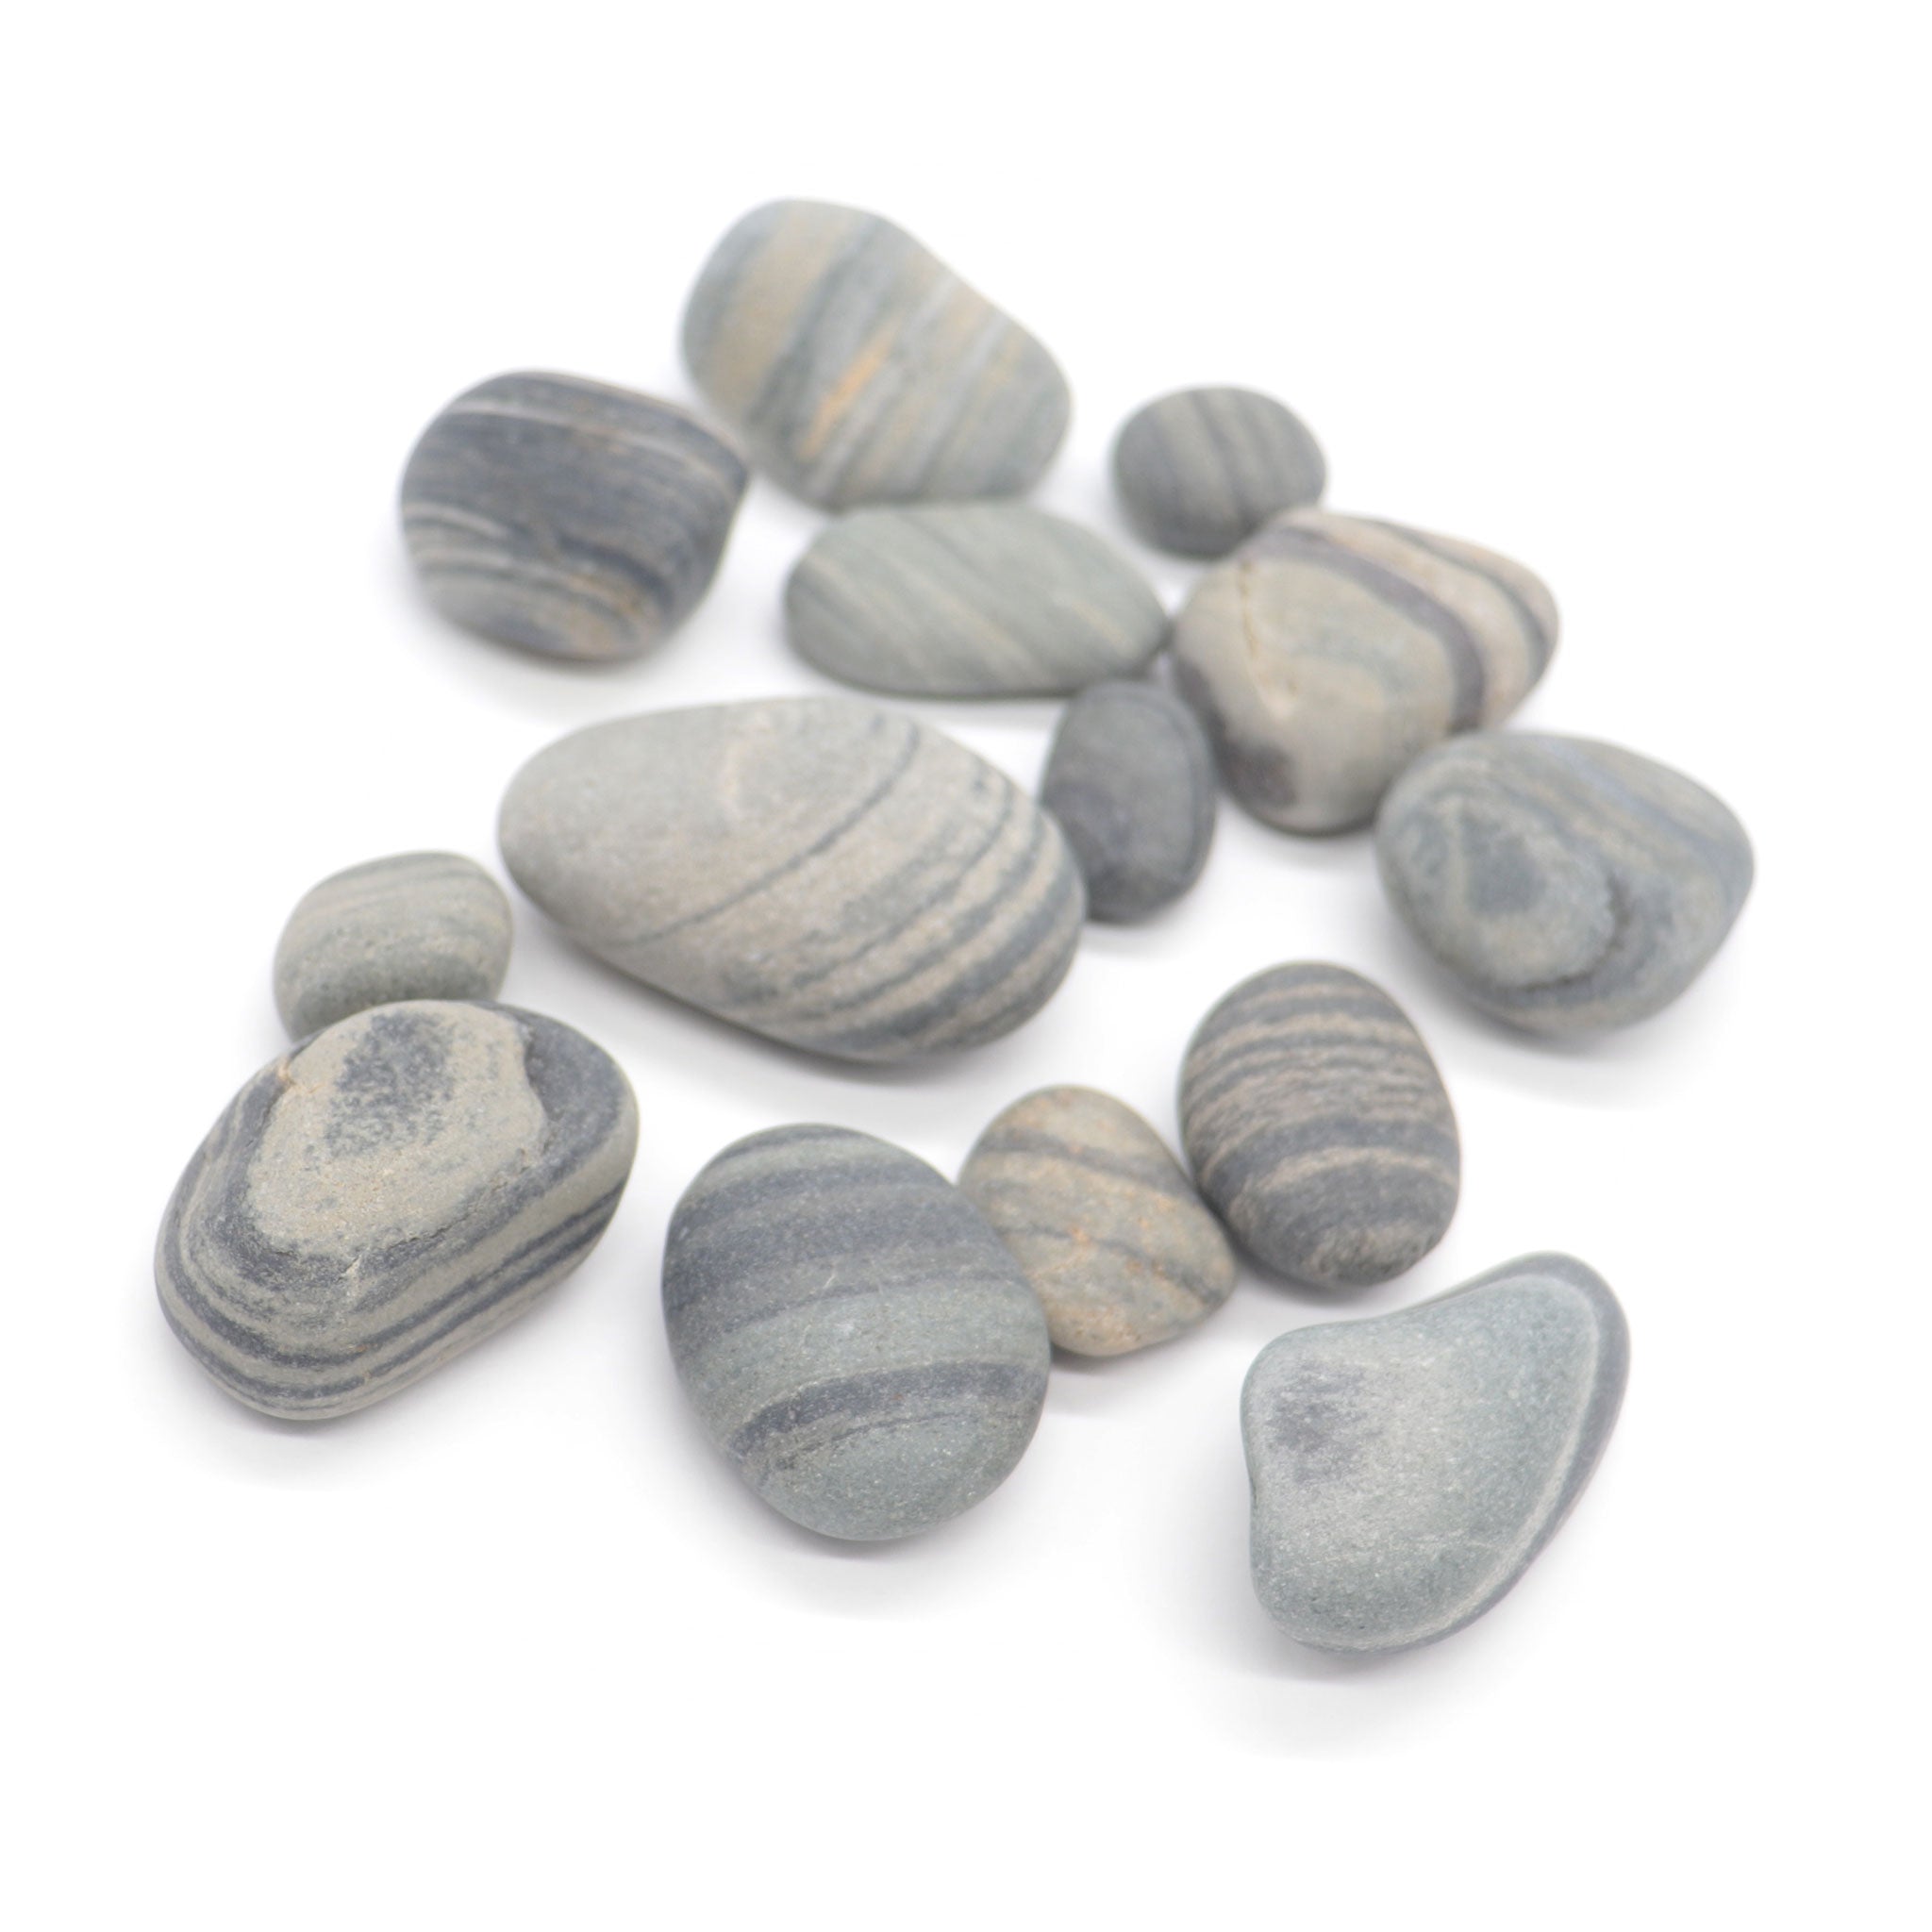 Banded Beach Luck Stone - 13 Moons